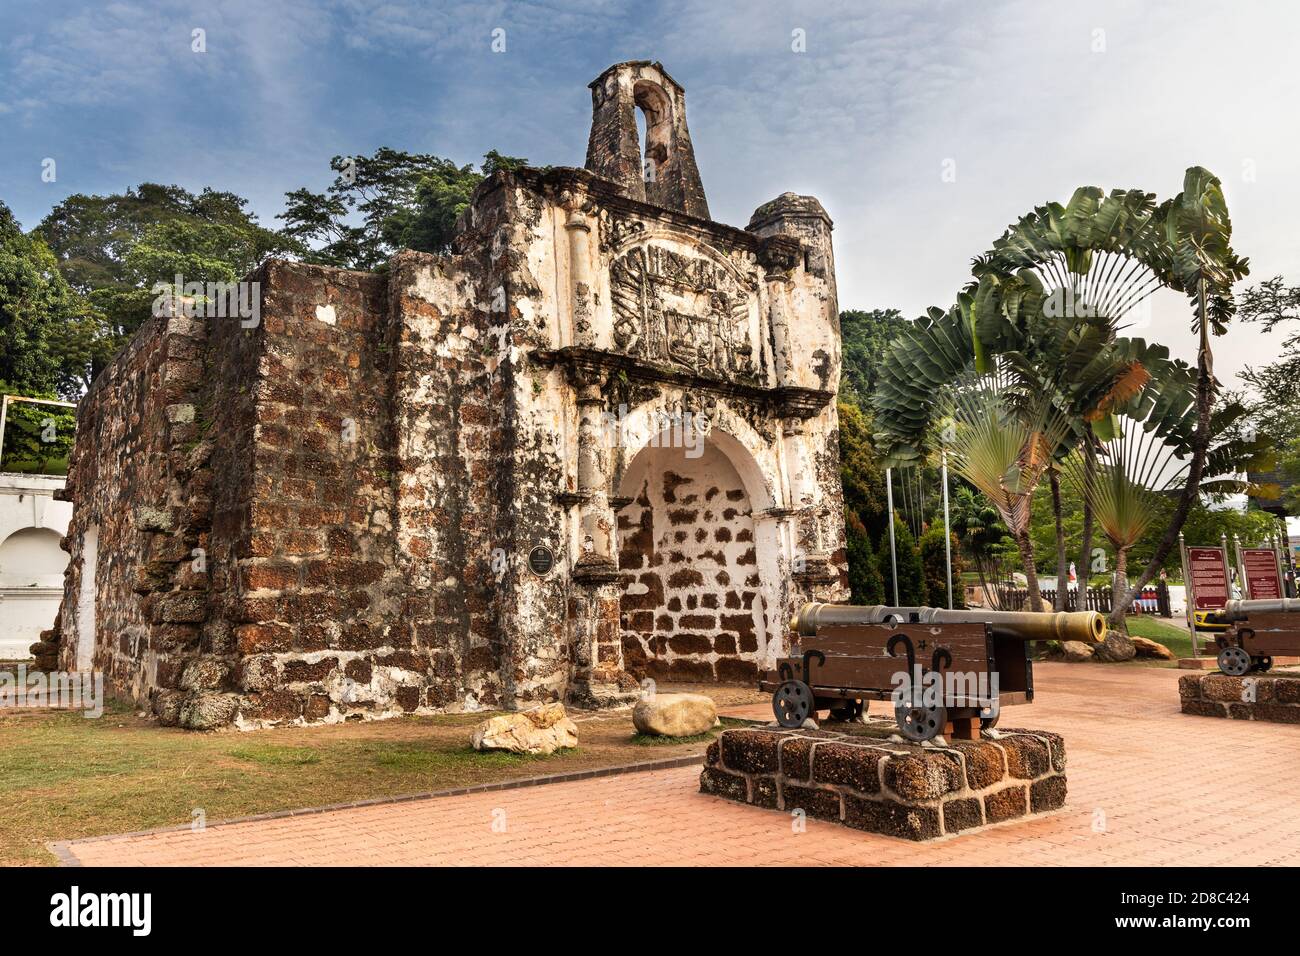 Historic ruins A Famosa is ancient Portuguese fortress. Popular tourism destination in Malacca. No people. Stock Photo